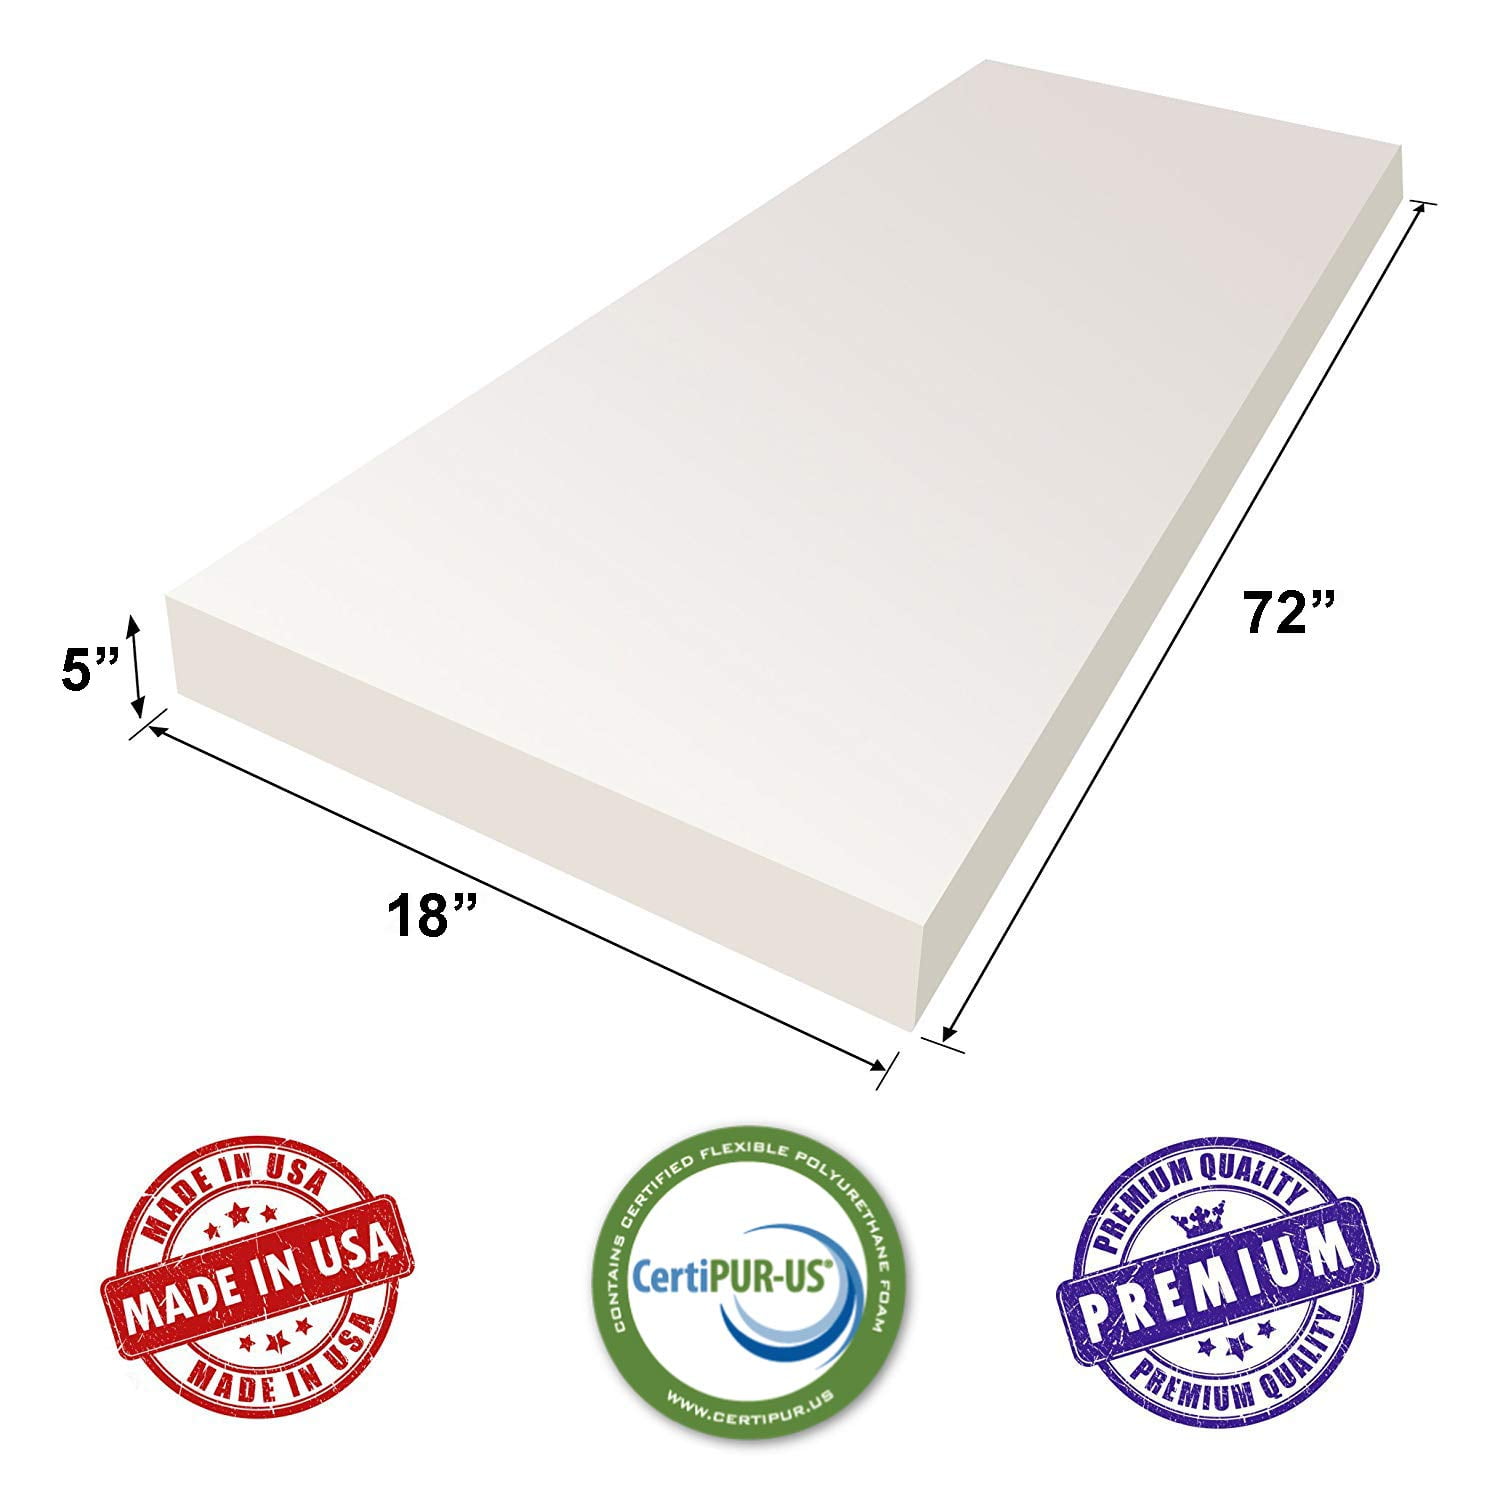 Foamy Foam High Density 4 inch Thick, 24 inch Wide, 96 inch Long Upholstery Foam, Cushion Replacement